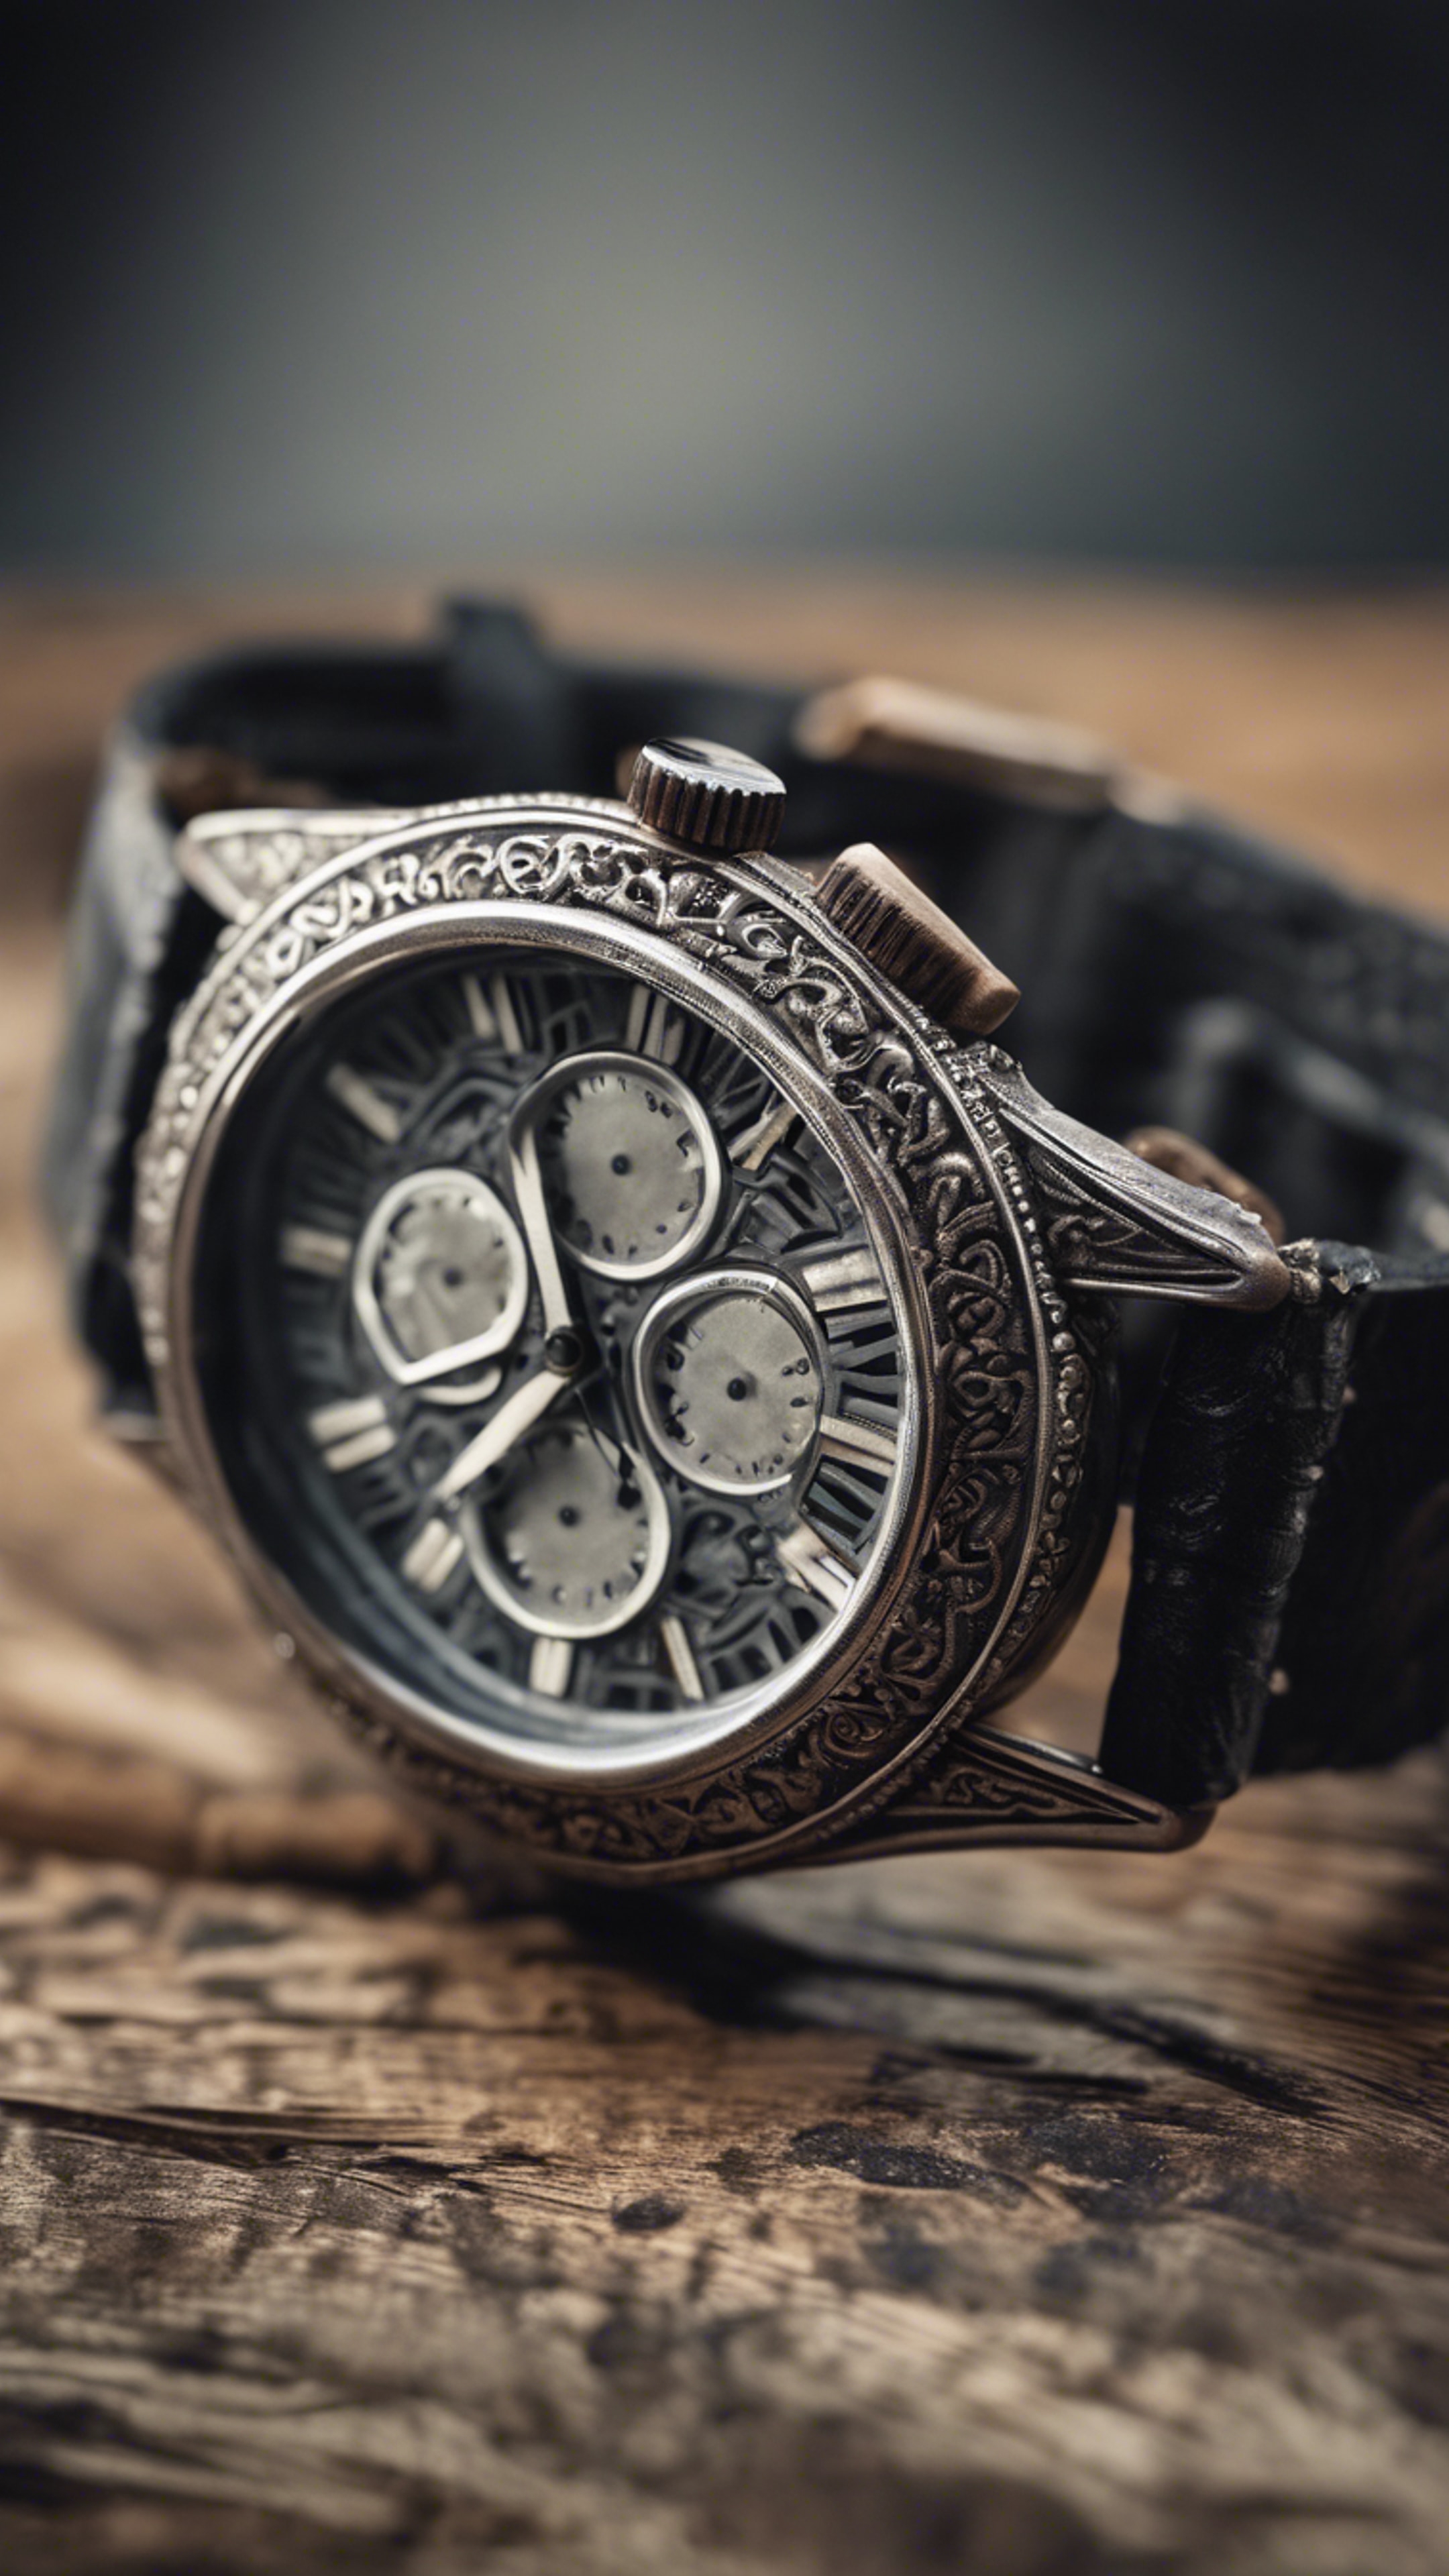 An antique, rustic, black and gray wristwatch with intricate details in its design. Hintergrund[fa36b50287764cf98f6d]